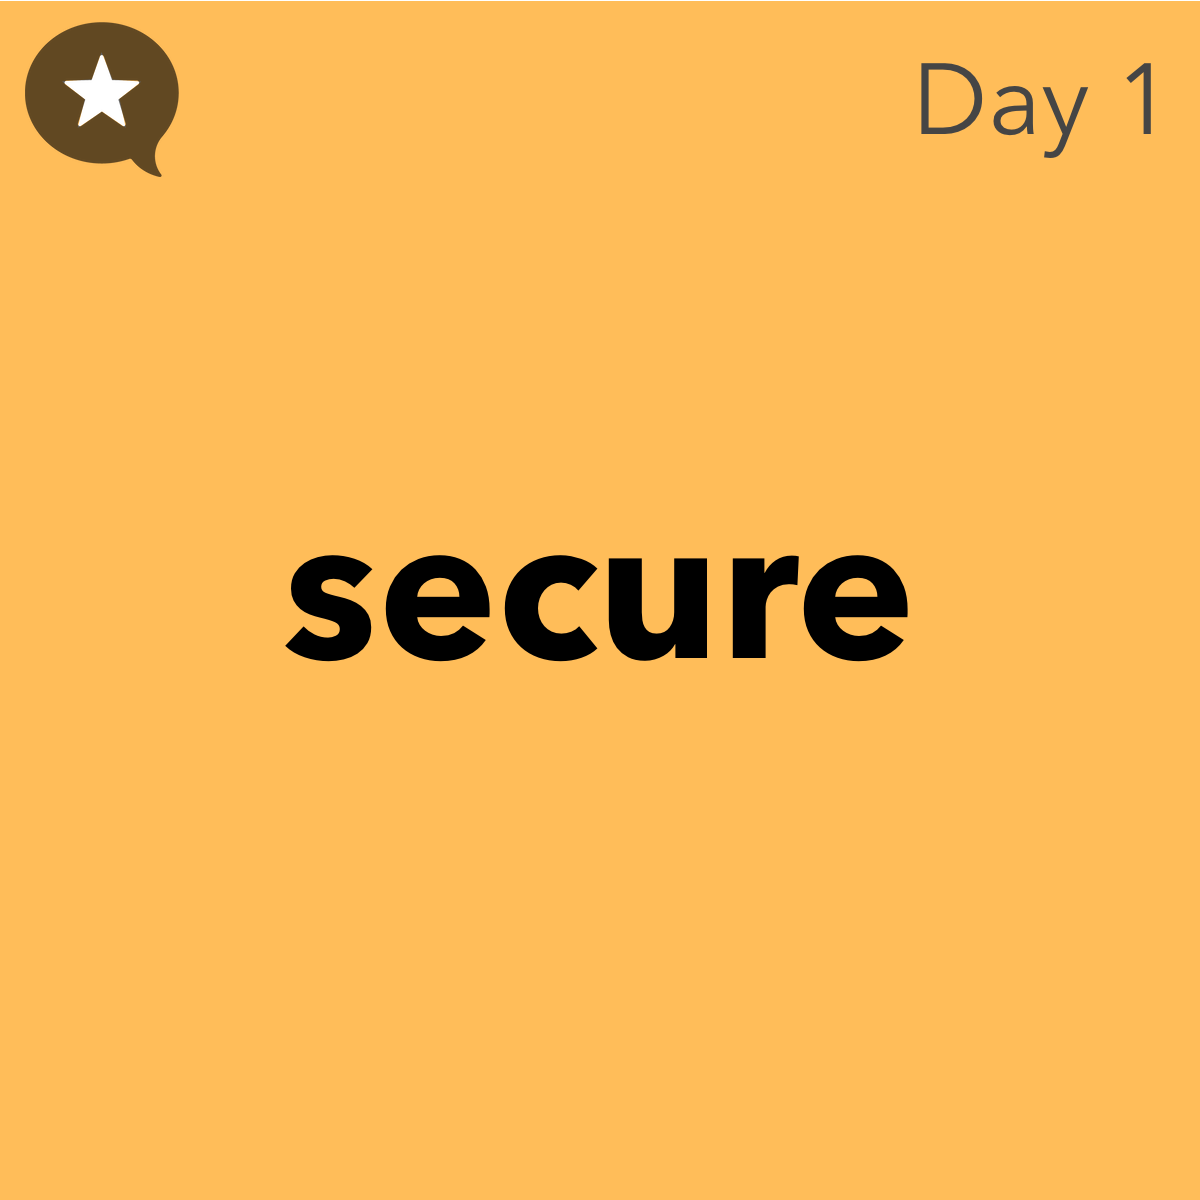 Graphic. Day 1: Secure